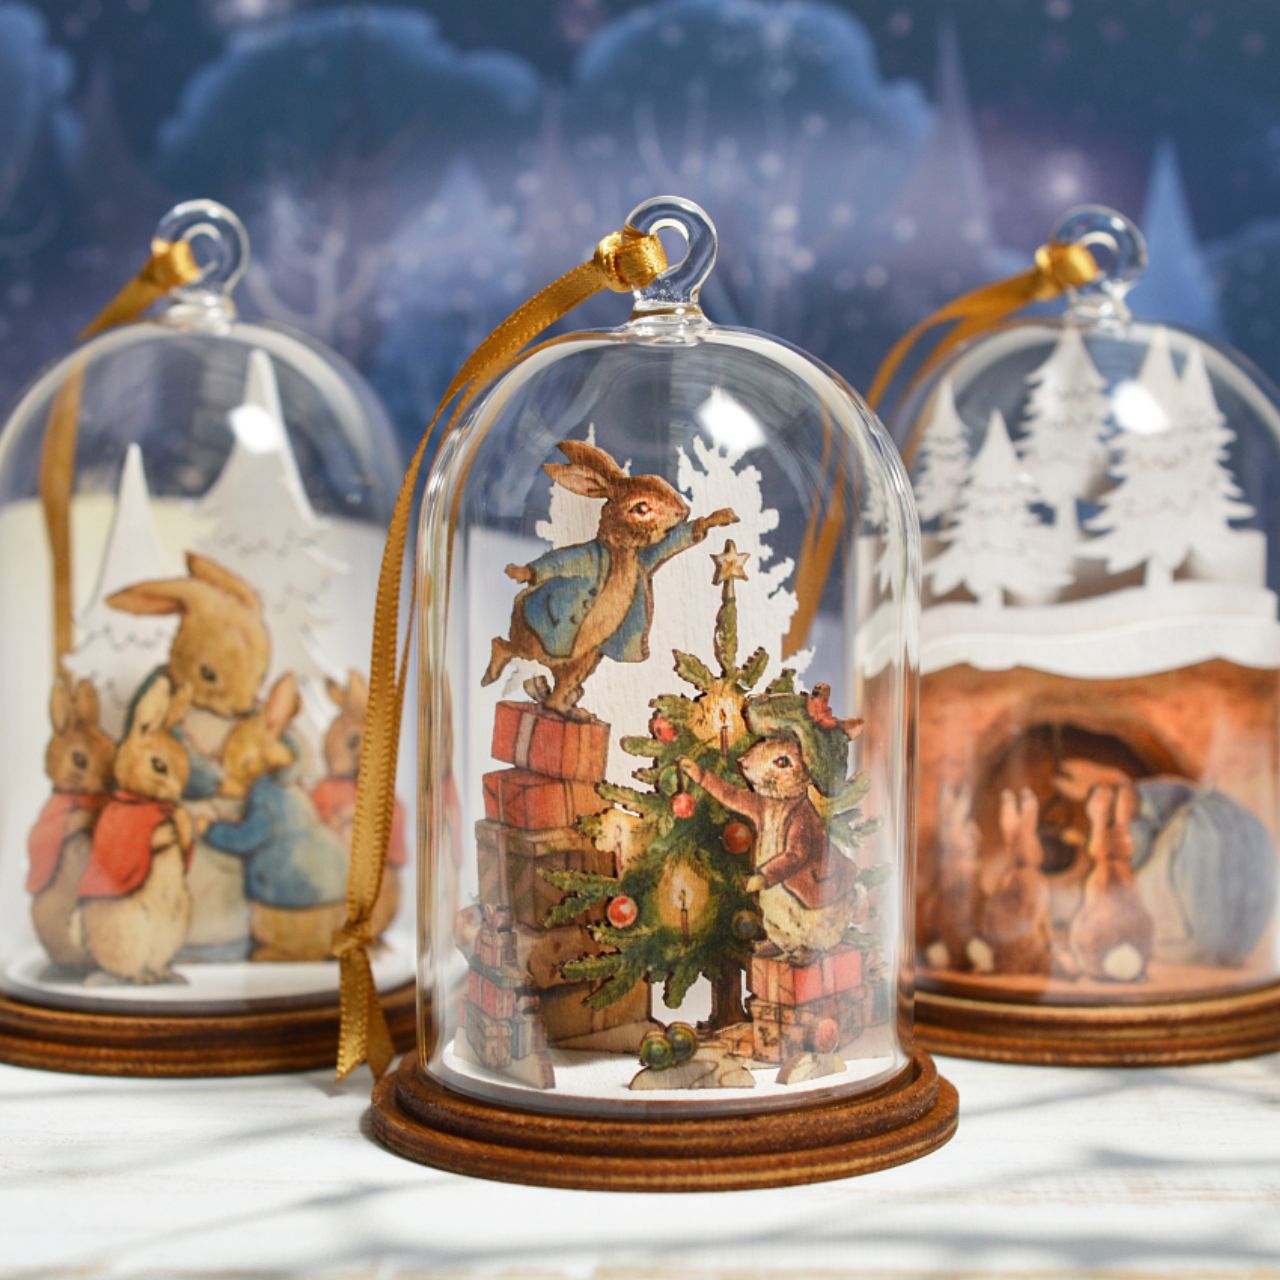 Mrs. Rabbit in Burrow Wooden Hanging Ornament  This charming Mrs. Rabbit wooden hanging ornament has been intricately created and comes encased in a beautiful eco-friendly glass dome. This classic vintage style helps bring to life the original illustrations from the Beatrix Potter stories.